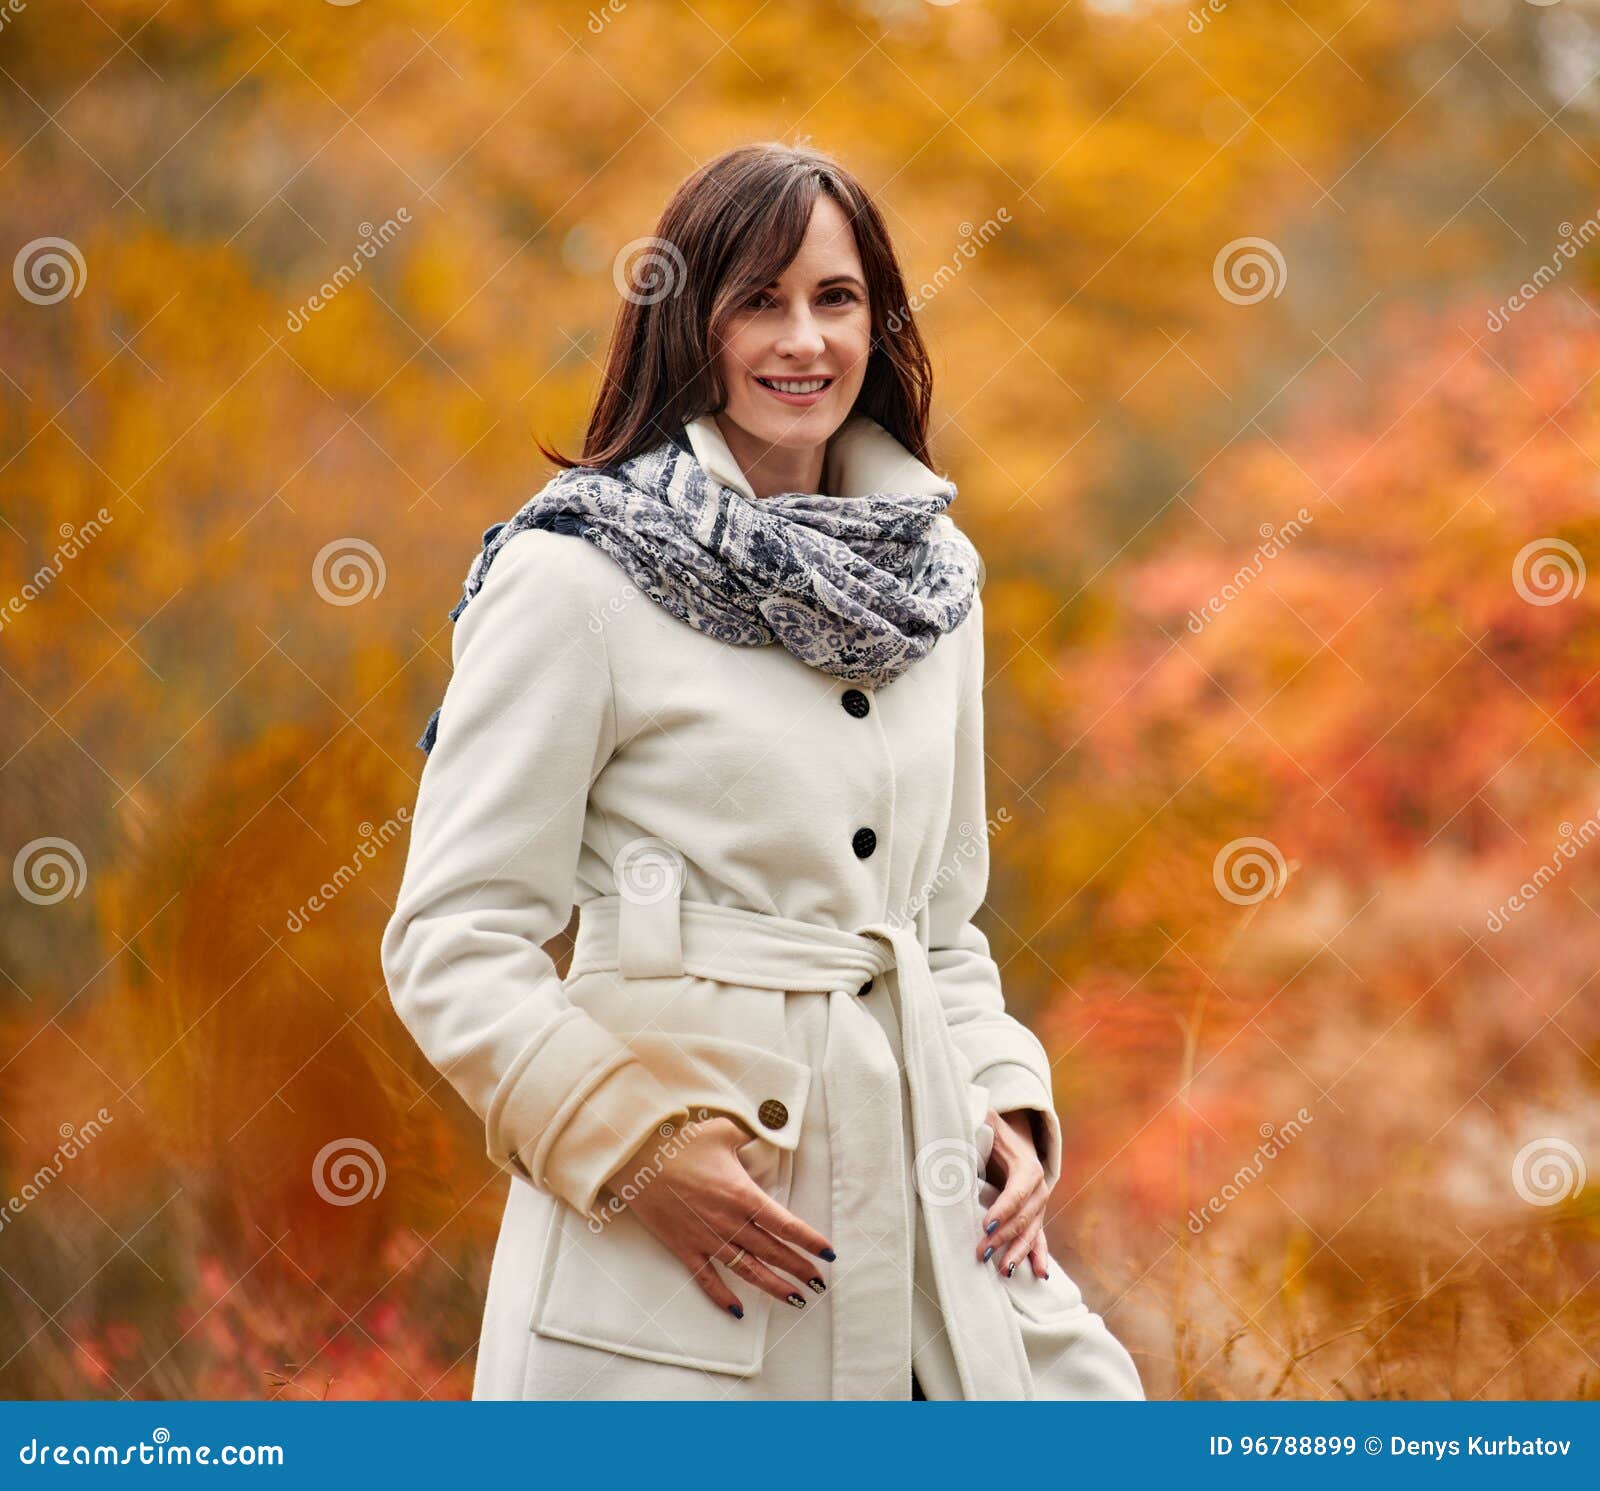 Stroll in Autumn Park Portrait Stock Image - Image of casual, nature ...